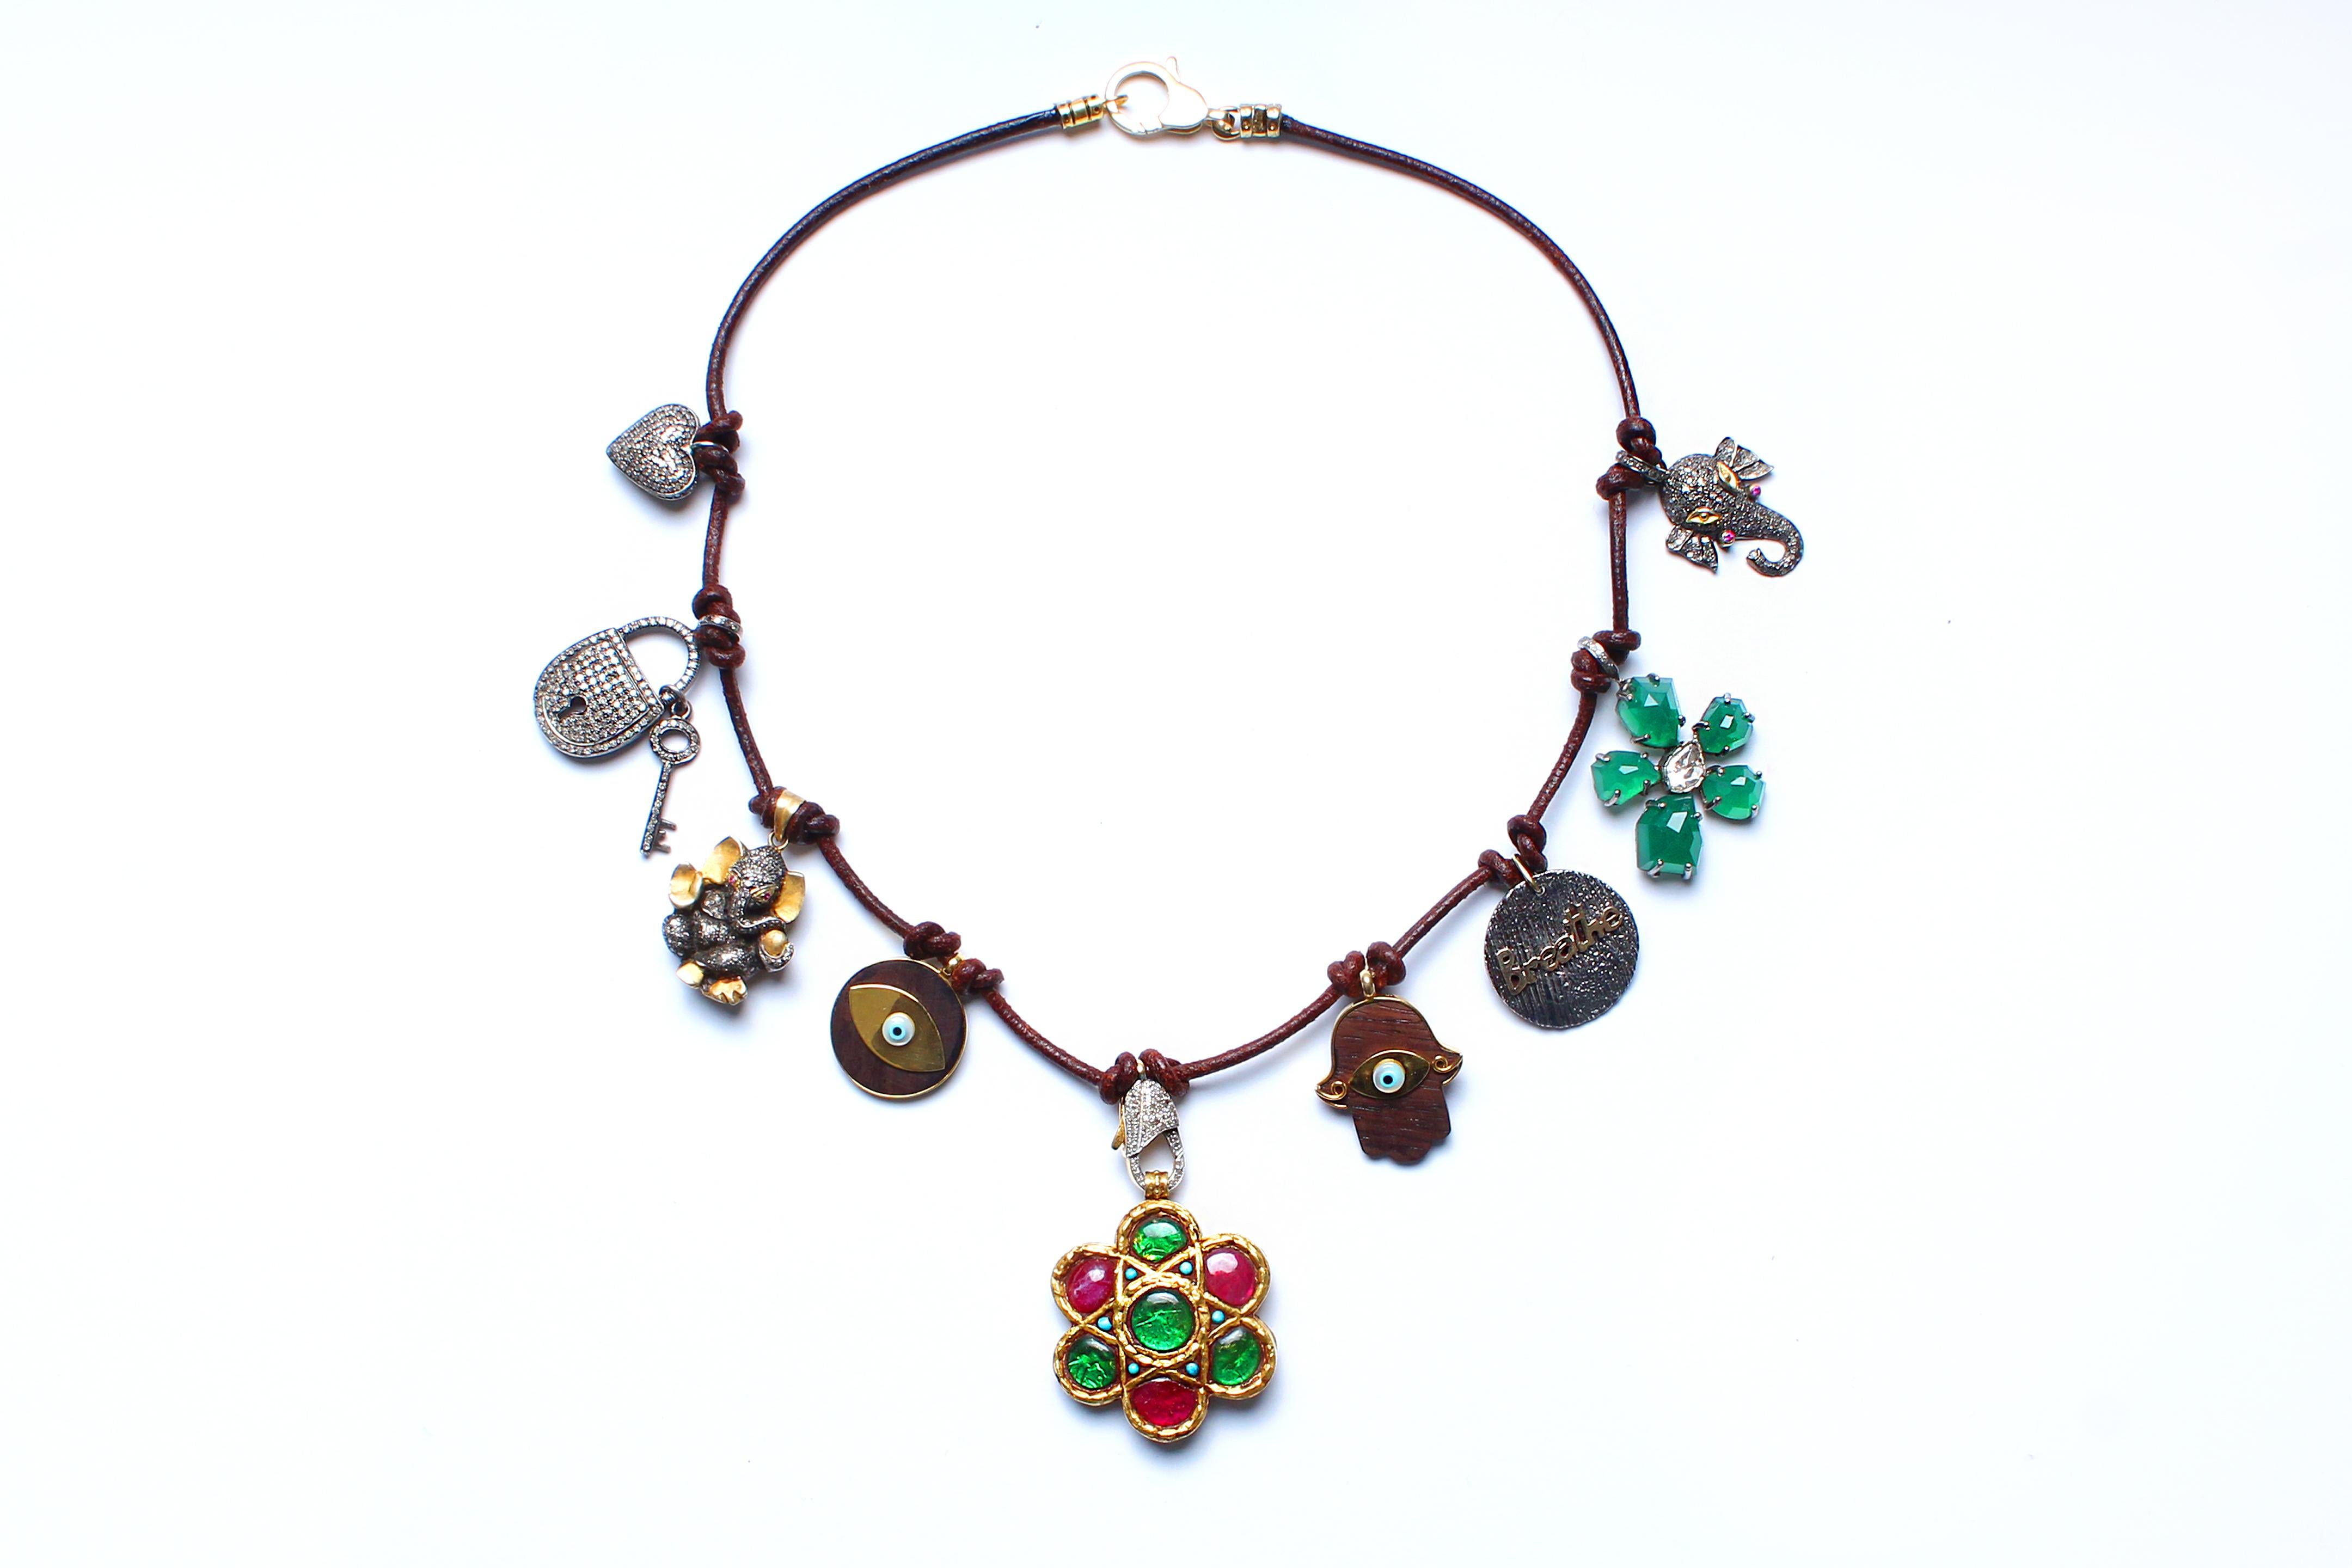 Rose Cut Clarissa Bronfman Brown Leather Charm Necklace